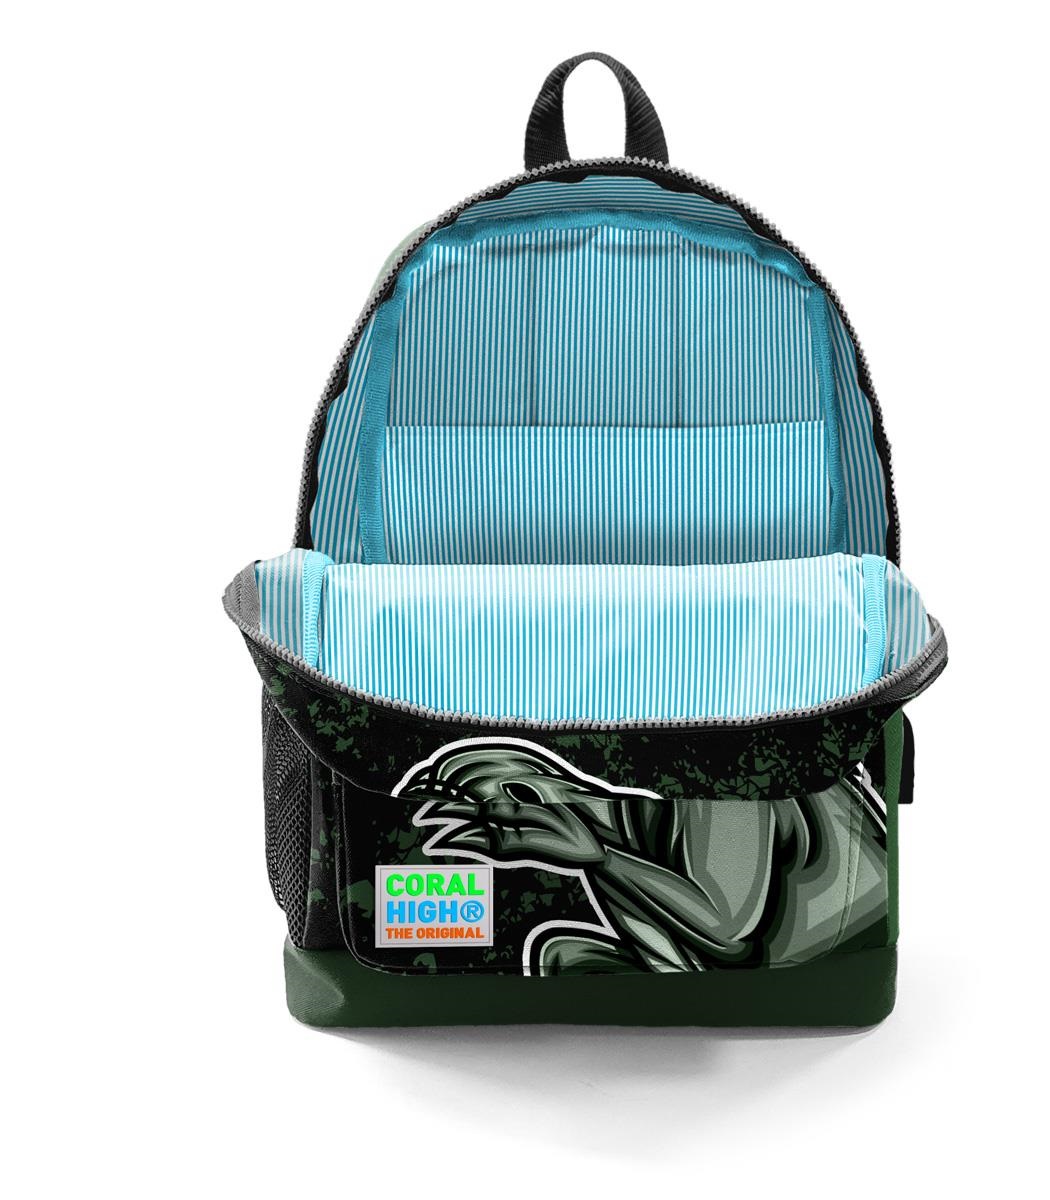 Coral High Kids Four Compartment USB School Backpack - Dark Green Black Dinosaur Patterned